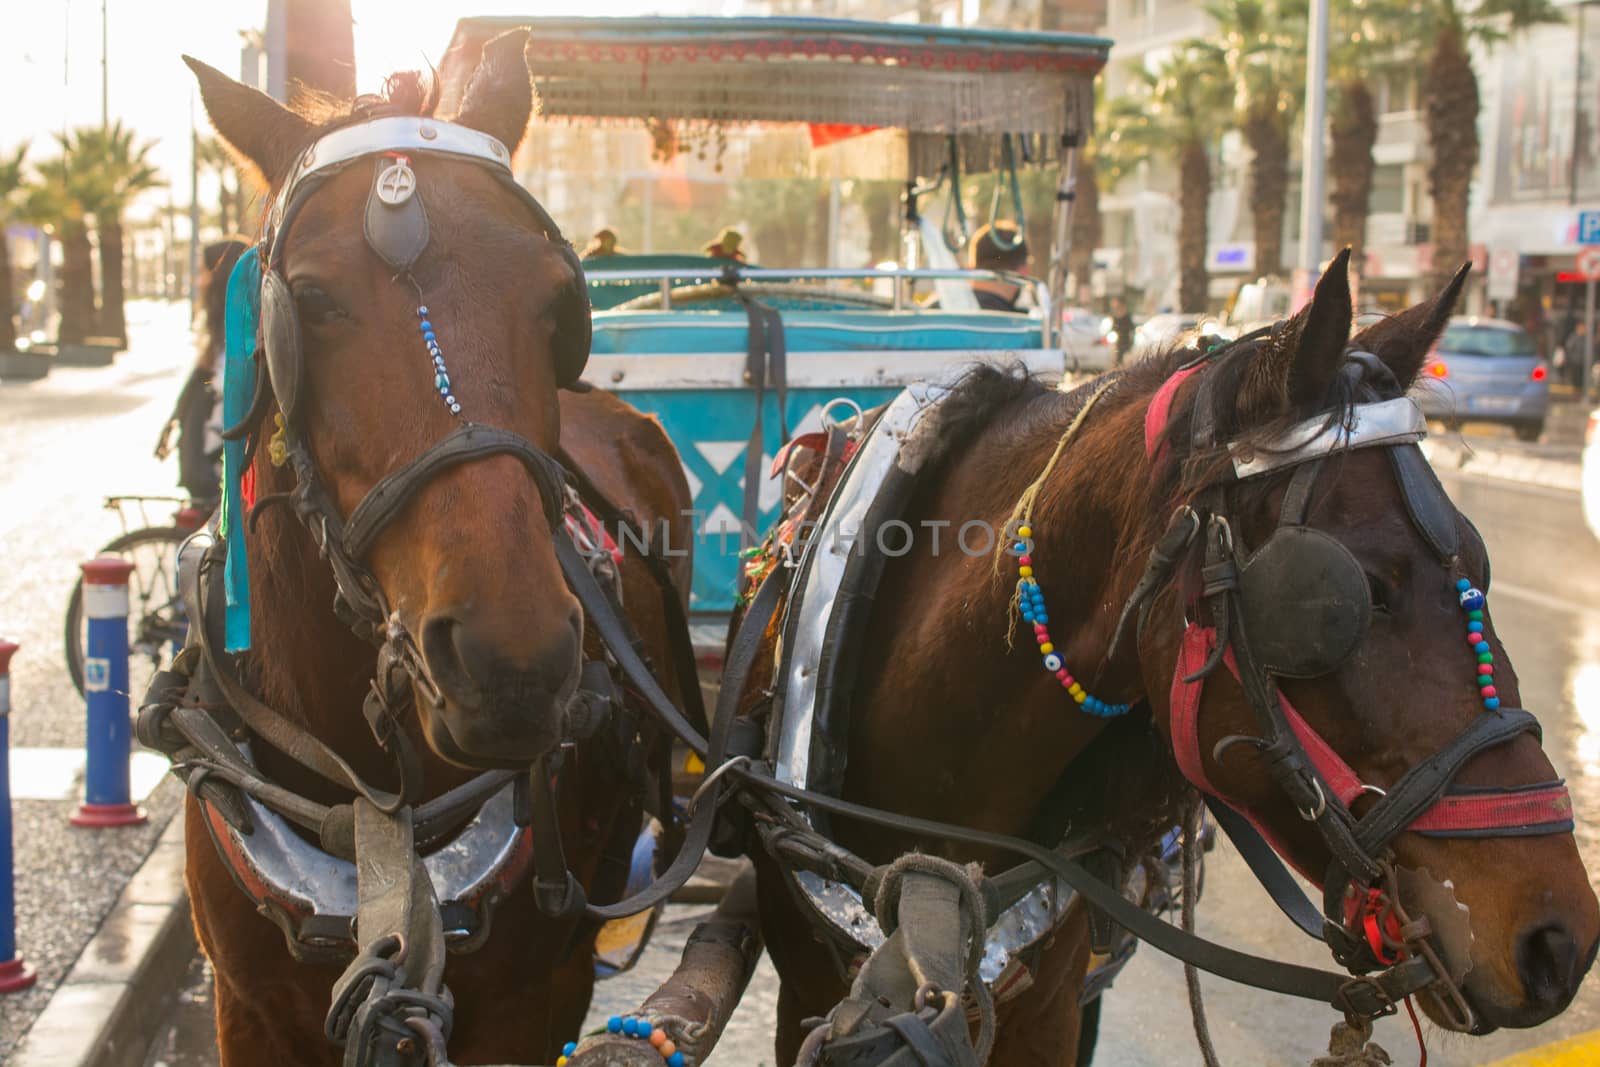 phaeton and two horse. tired horses. the evening sun comes over. they are waiting for the phaeton customers. Horse Carrier.